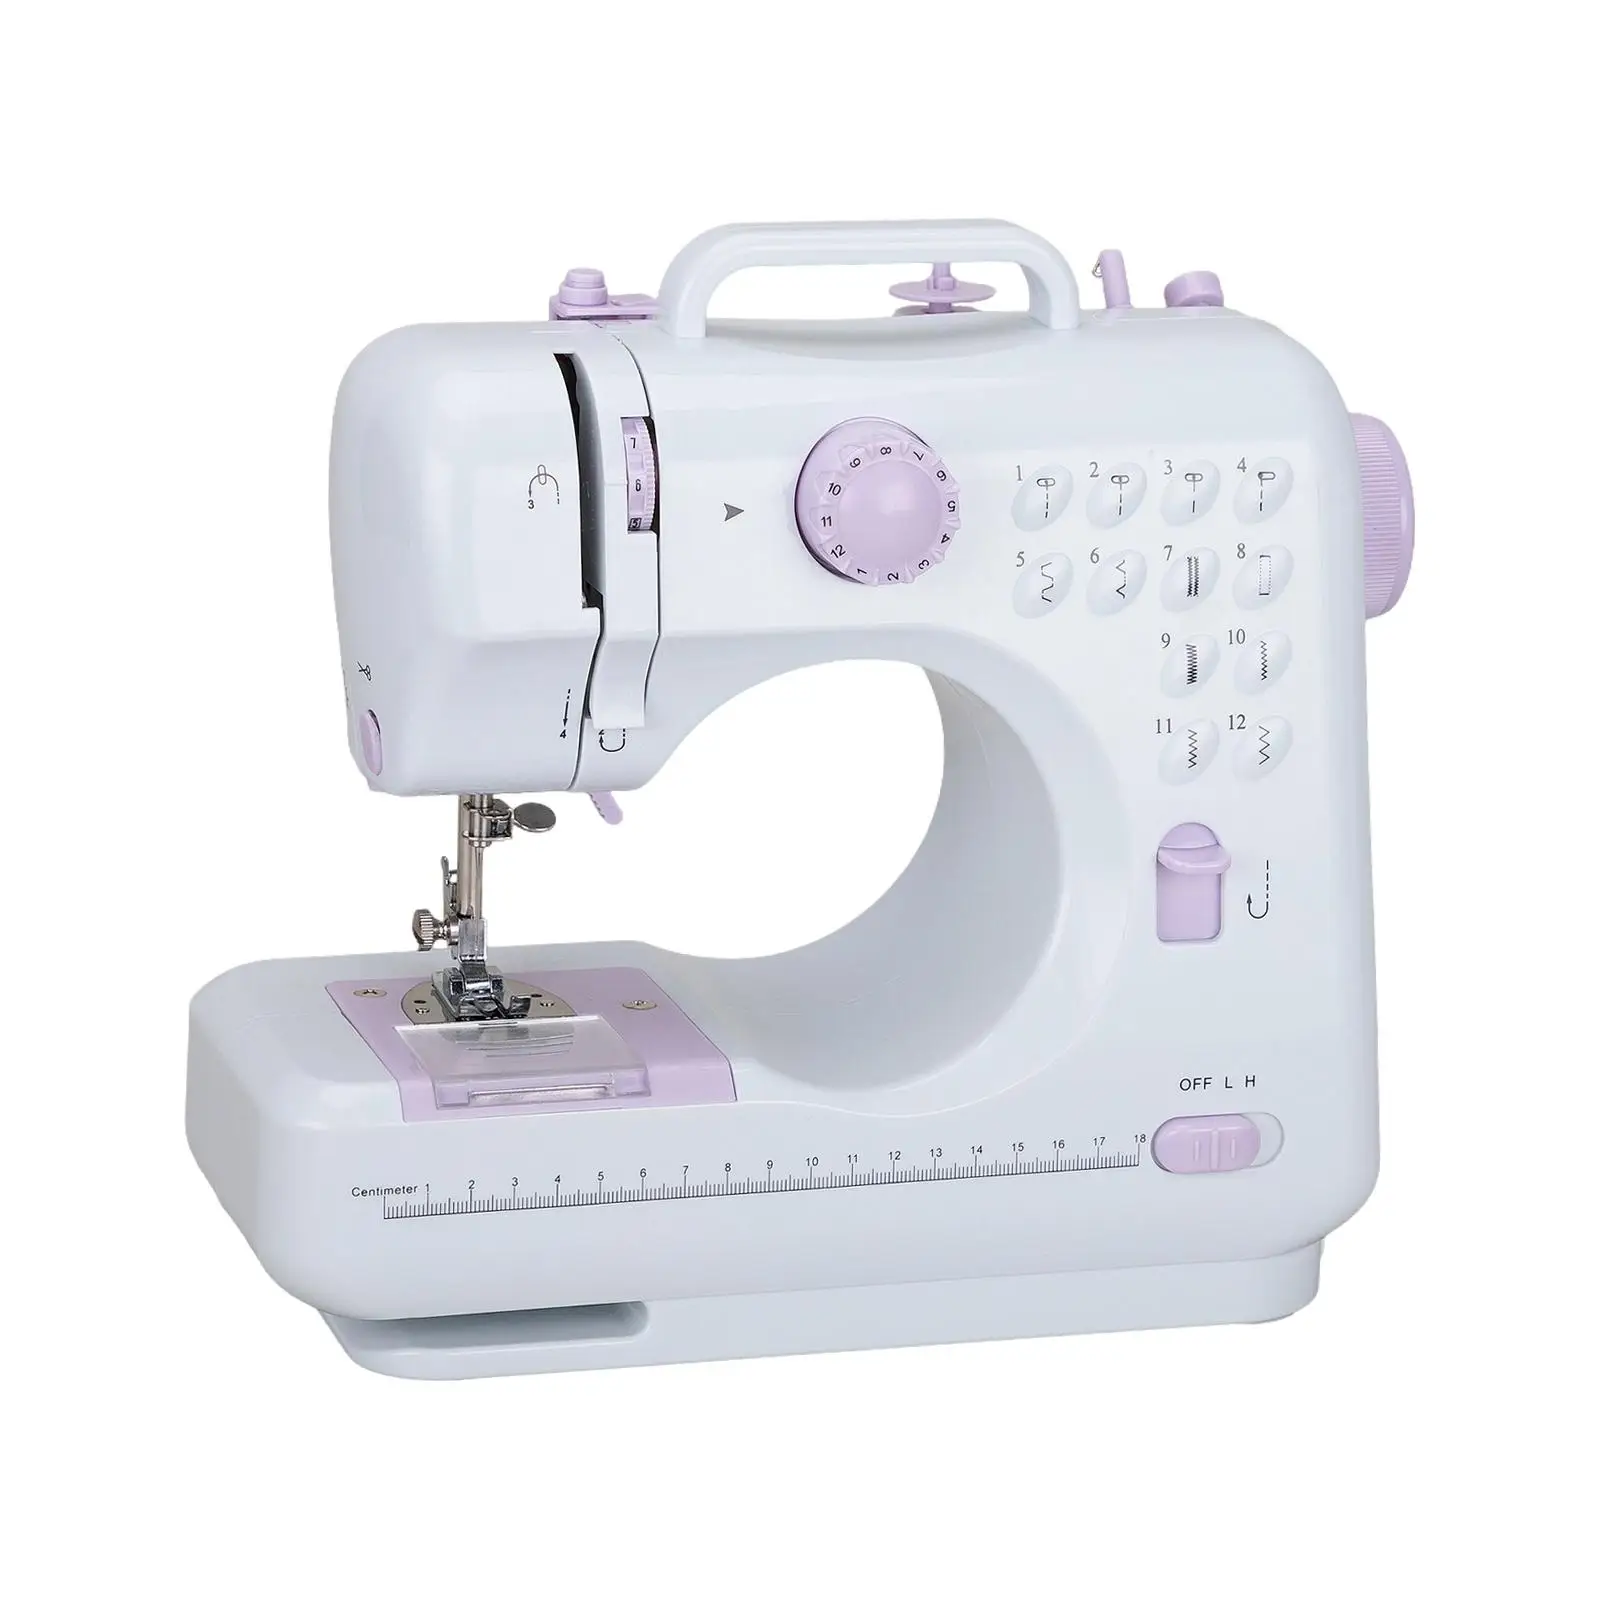 Domestic Sewing Machine with Foot Pedal Compact Size Portable Sewing Machine